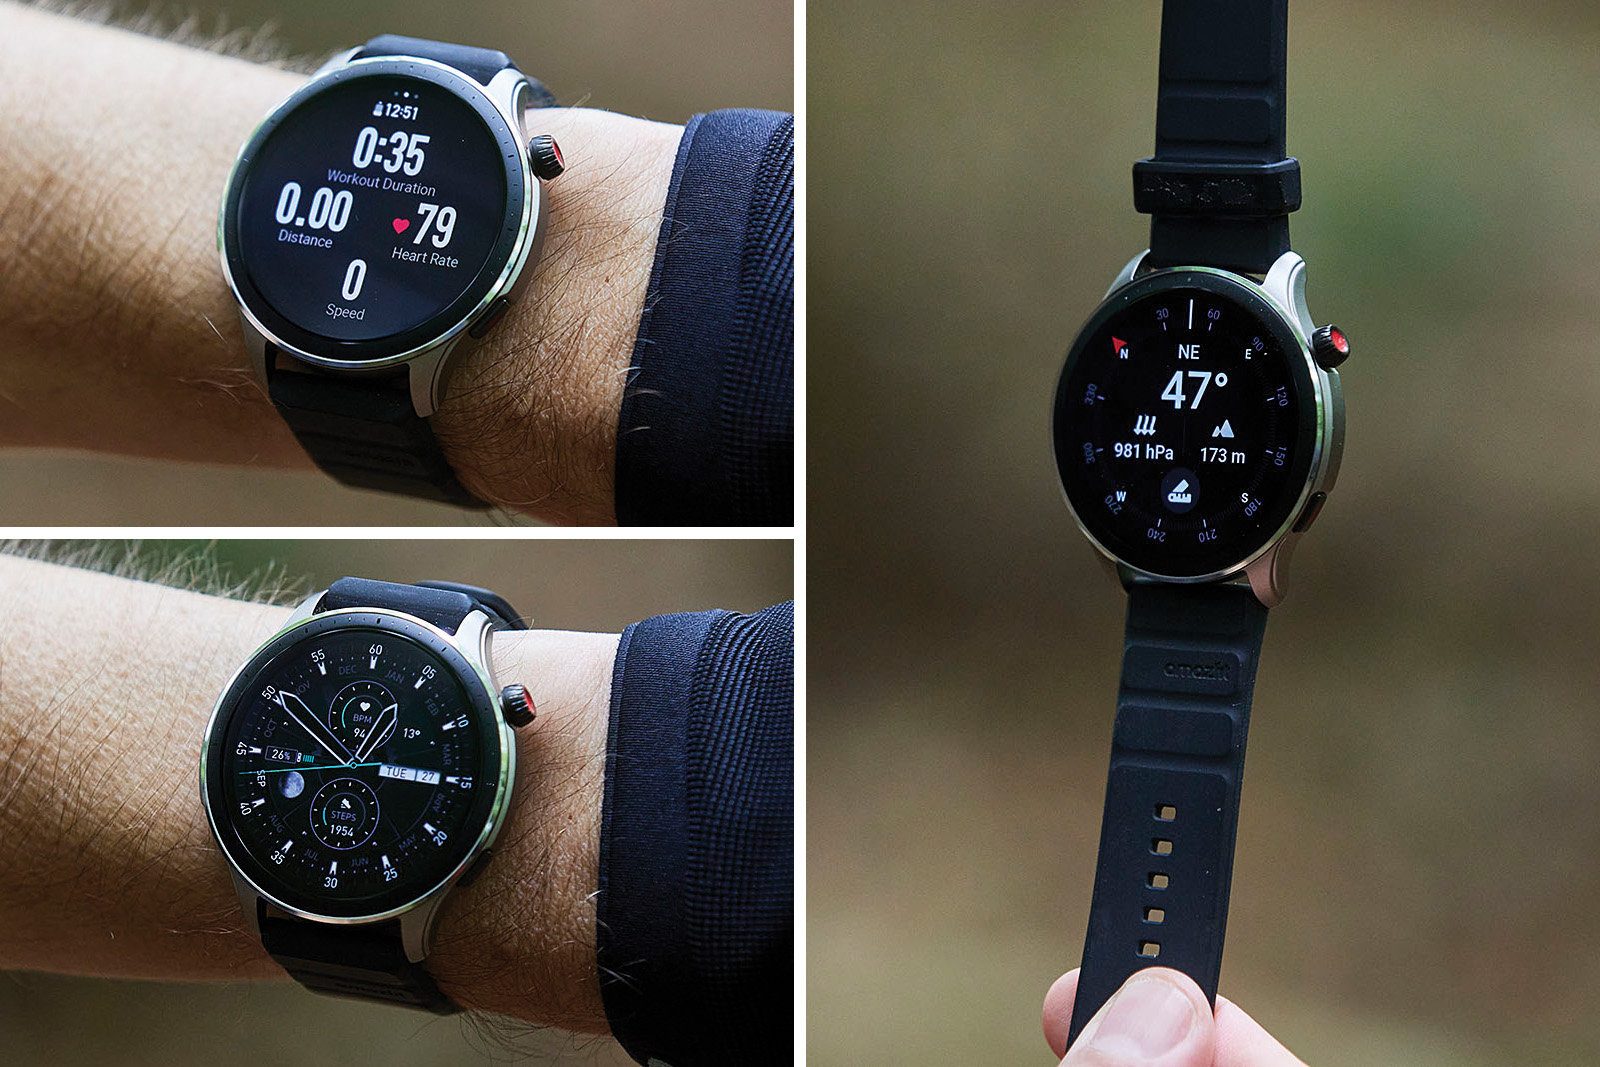 Exclusive: First look at the Amazfit GTR 4 and GTS 4 -  news